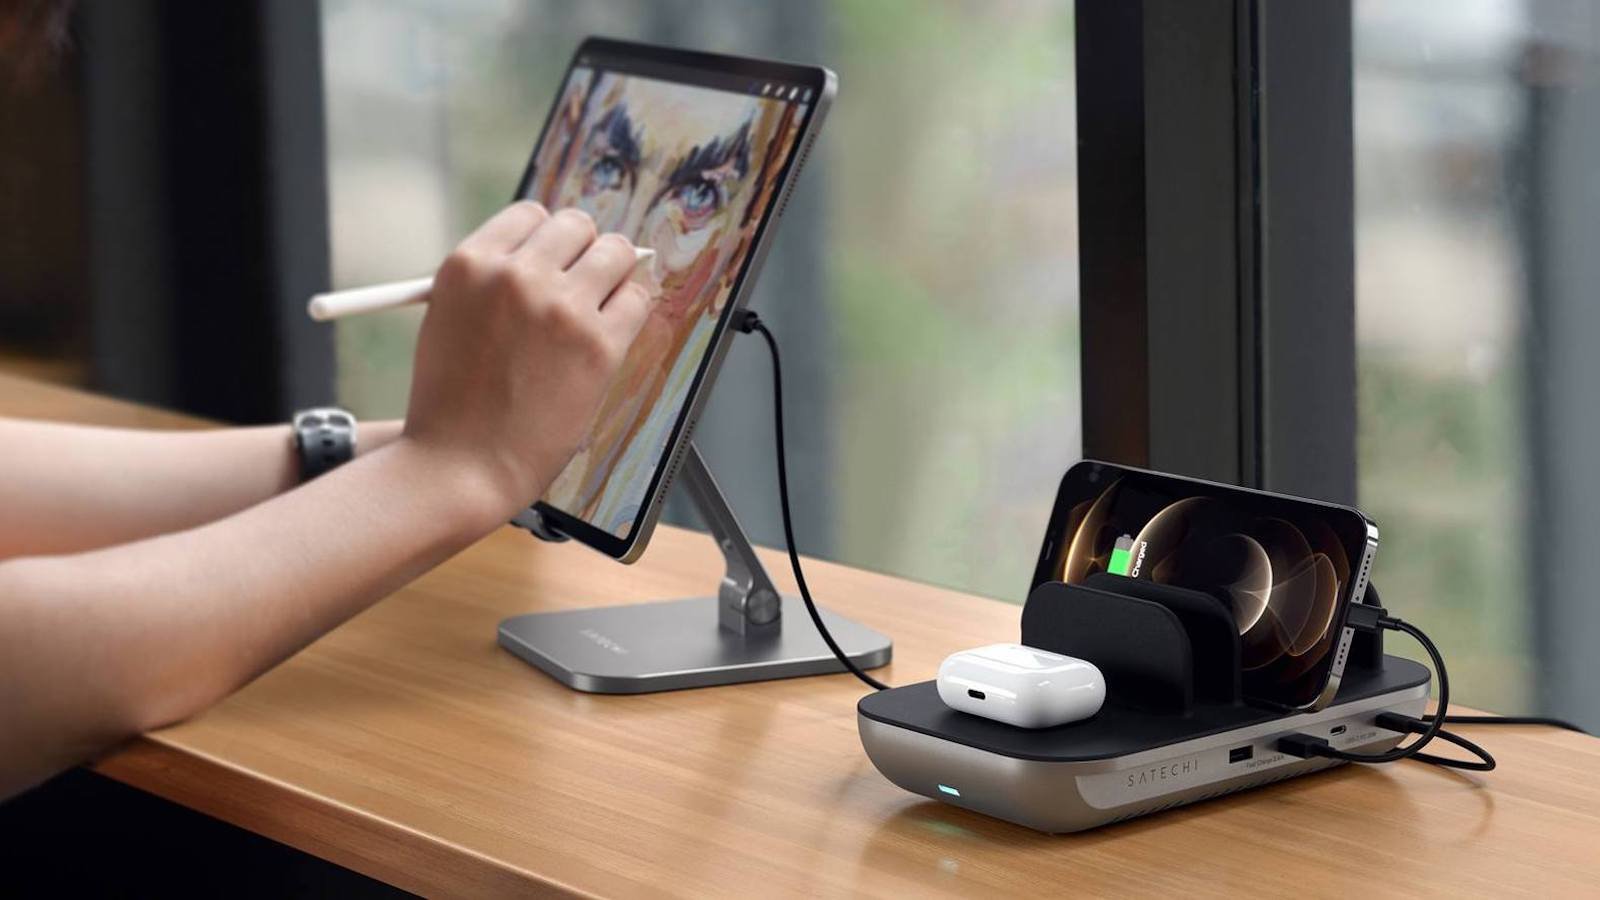 Satechi Dock5 Multi-Device Charging Station organizes your workspace